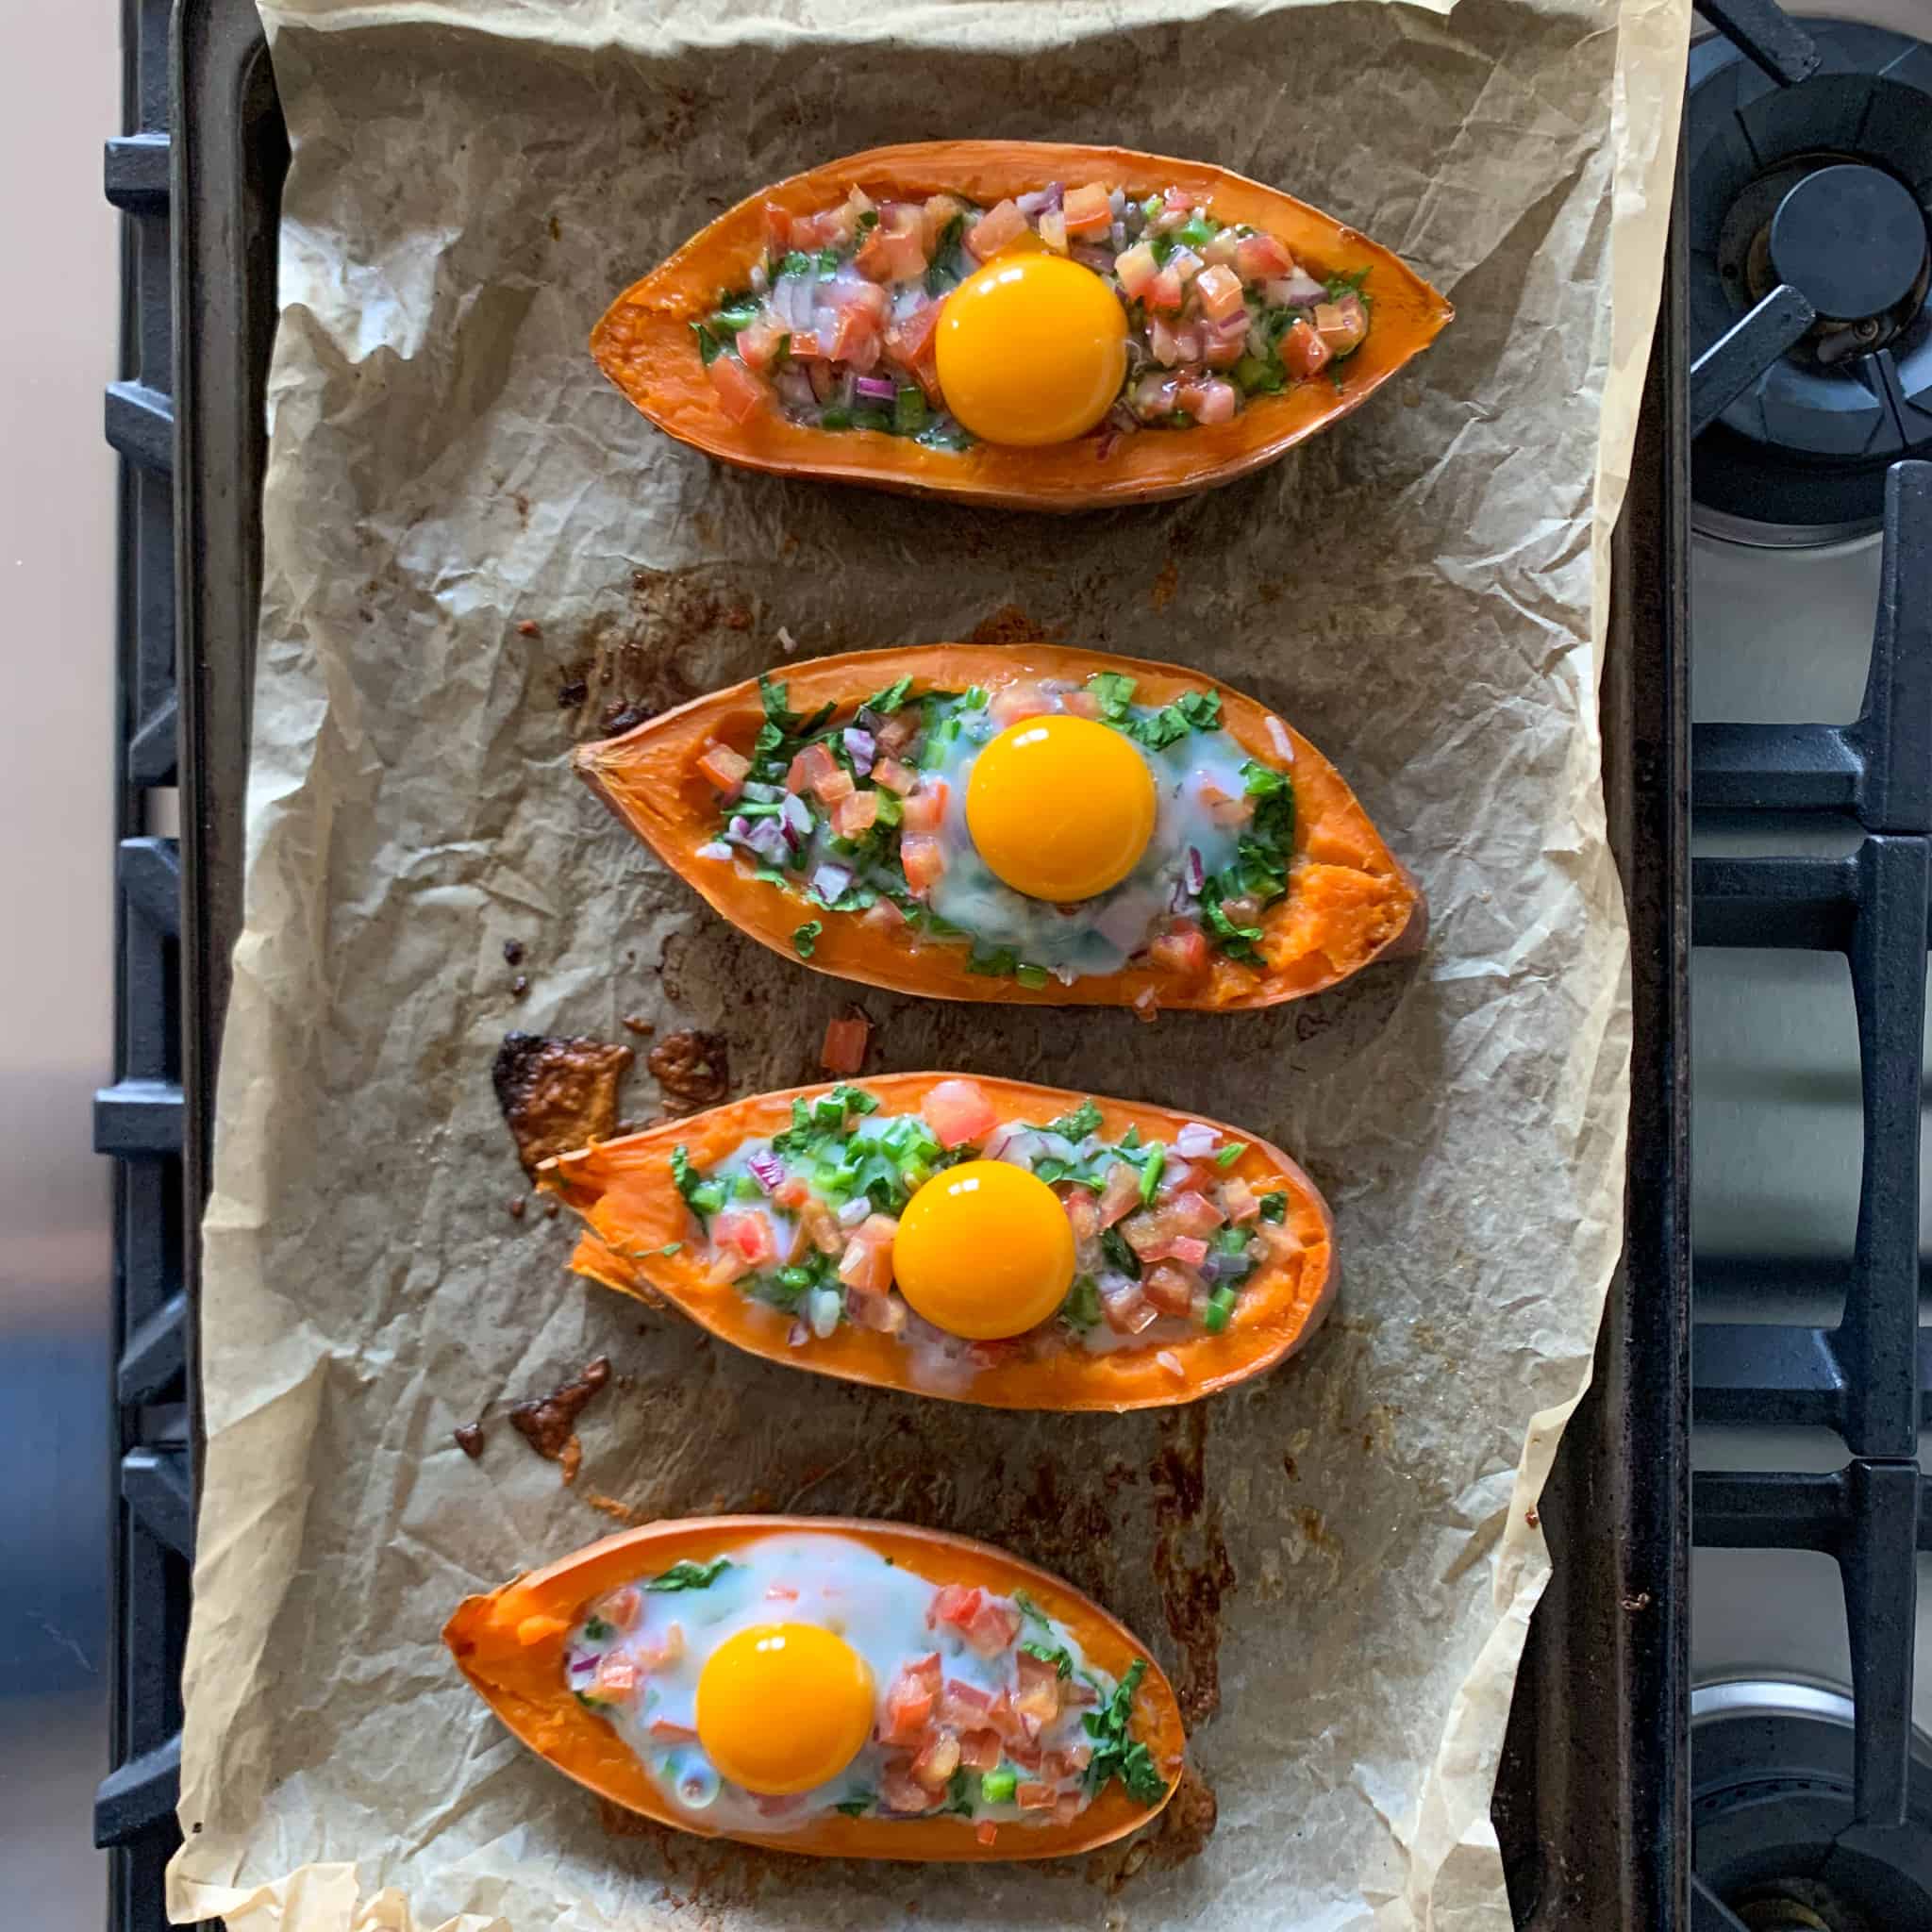 Sweet Potato Boats stuffed with veggies and an egg ready to go back into the oven.